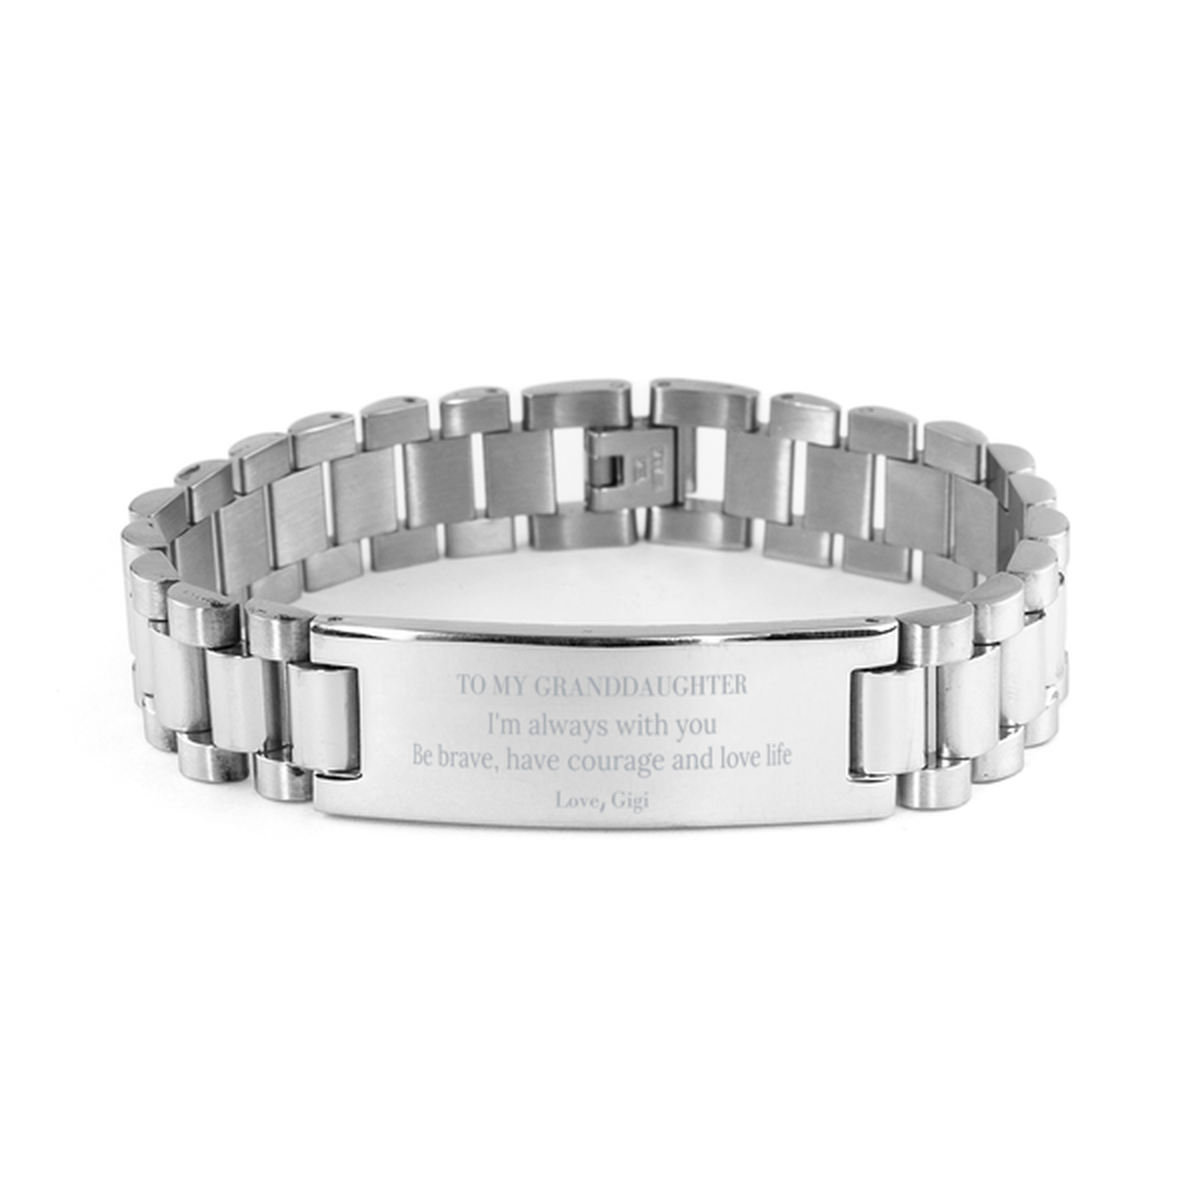 To My Granddaughter Gifts from Gigi, Unique Ladder Stainless Steel Bracelet Inspirational Christmas Birthday Graduation Gifts for Granddaughter I'm always with you. Be brave, have courage and love life. Love, Gigi